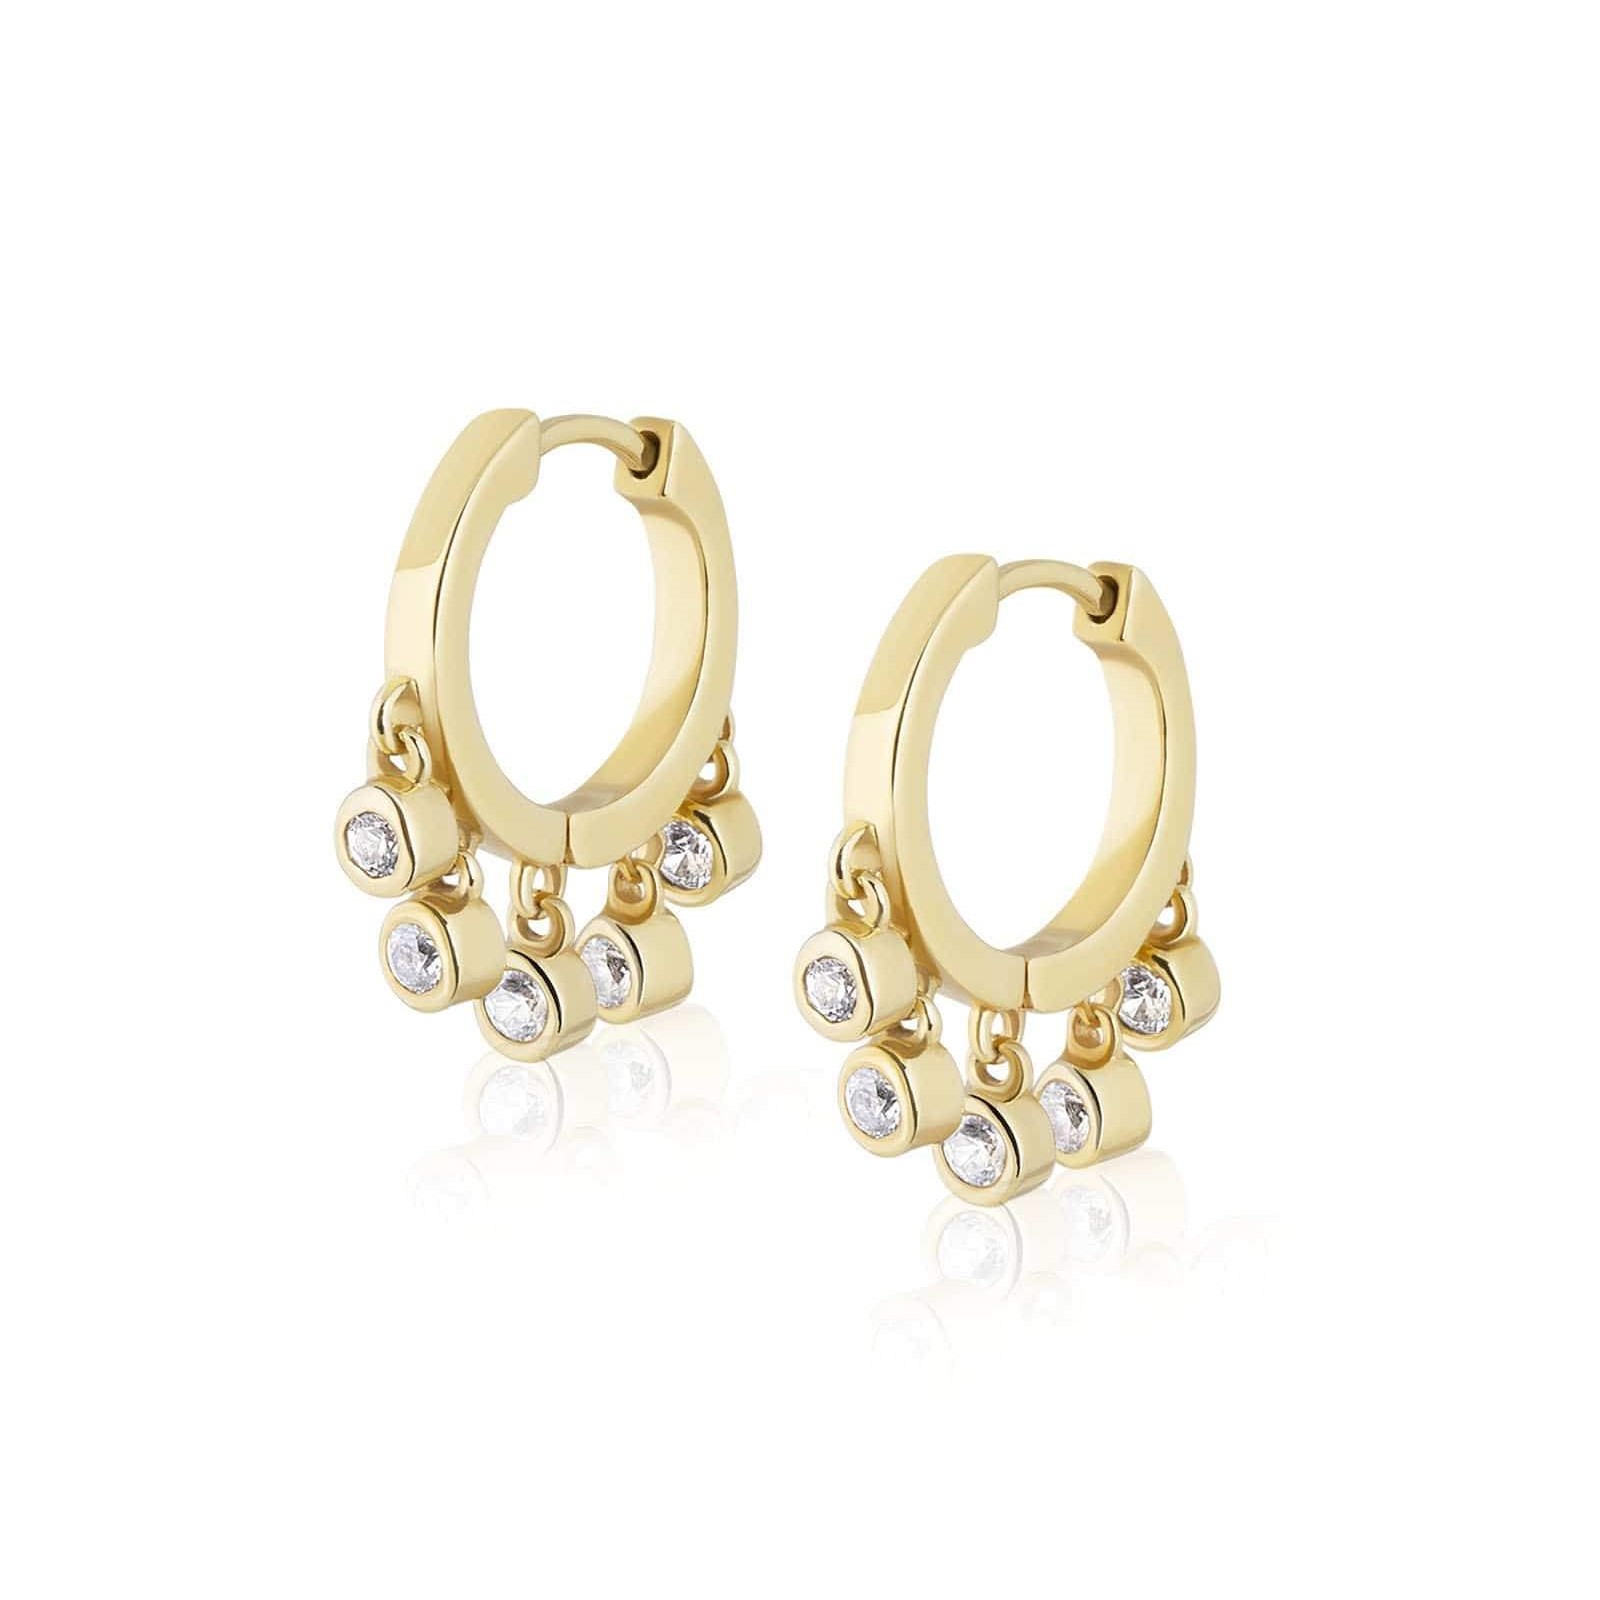 Sterling silver plated in 14 karat yellow gold huggies with white zircon dangles.